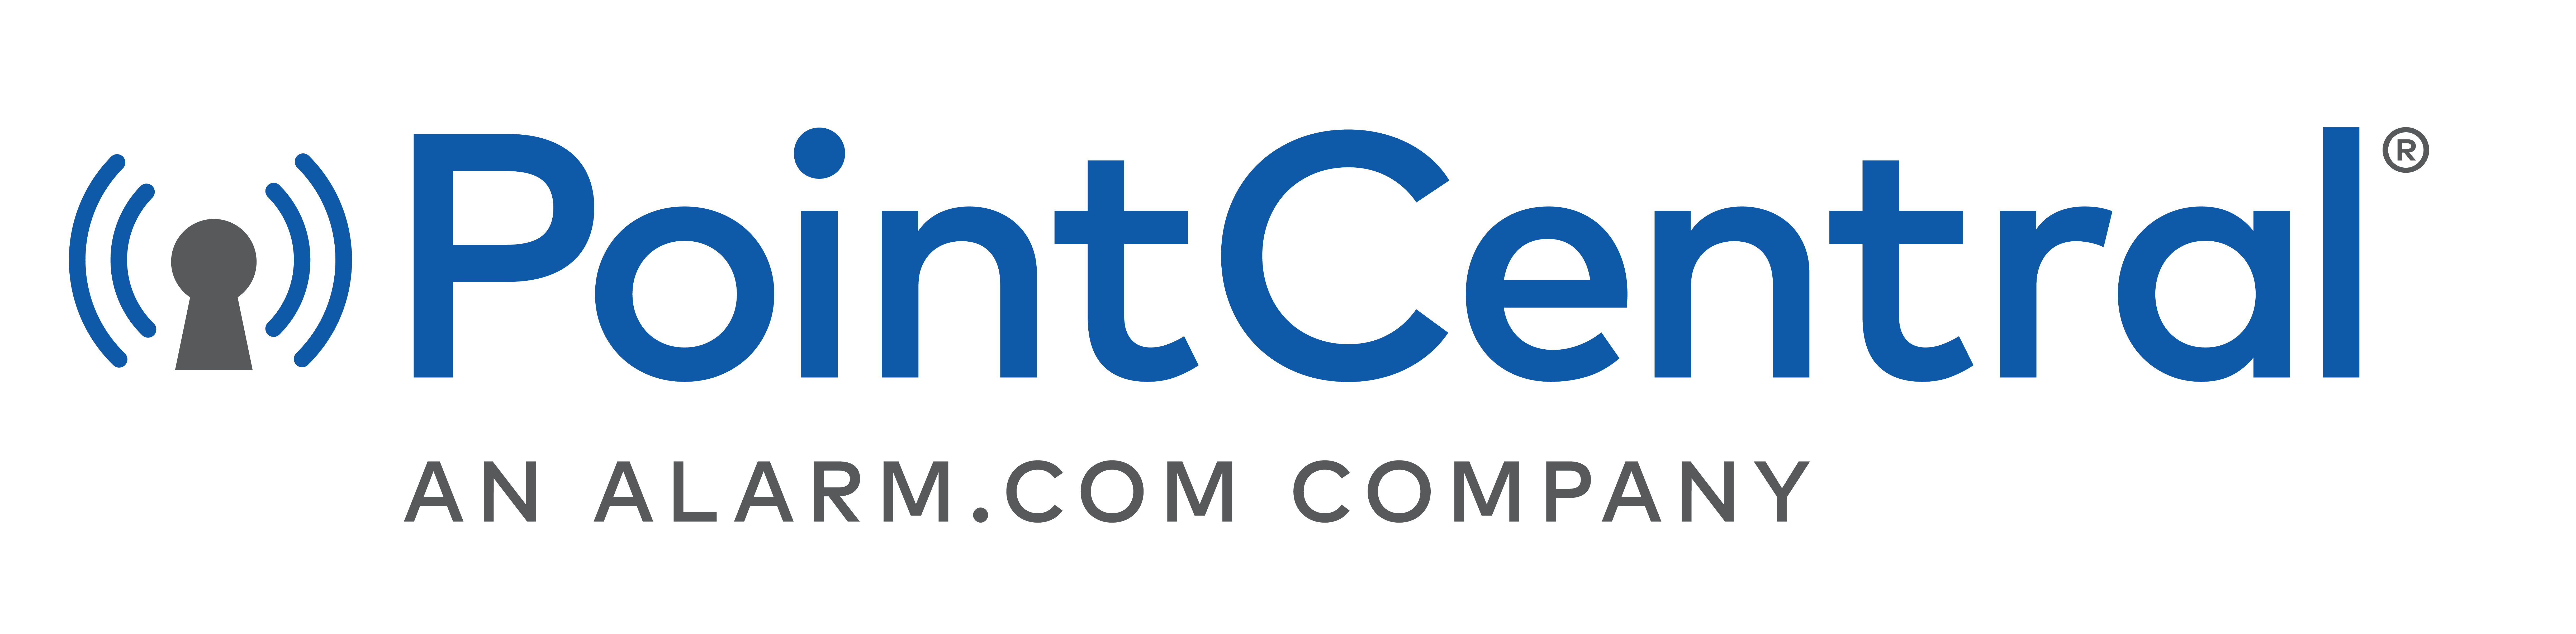 Point Central Logo